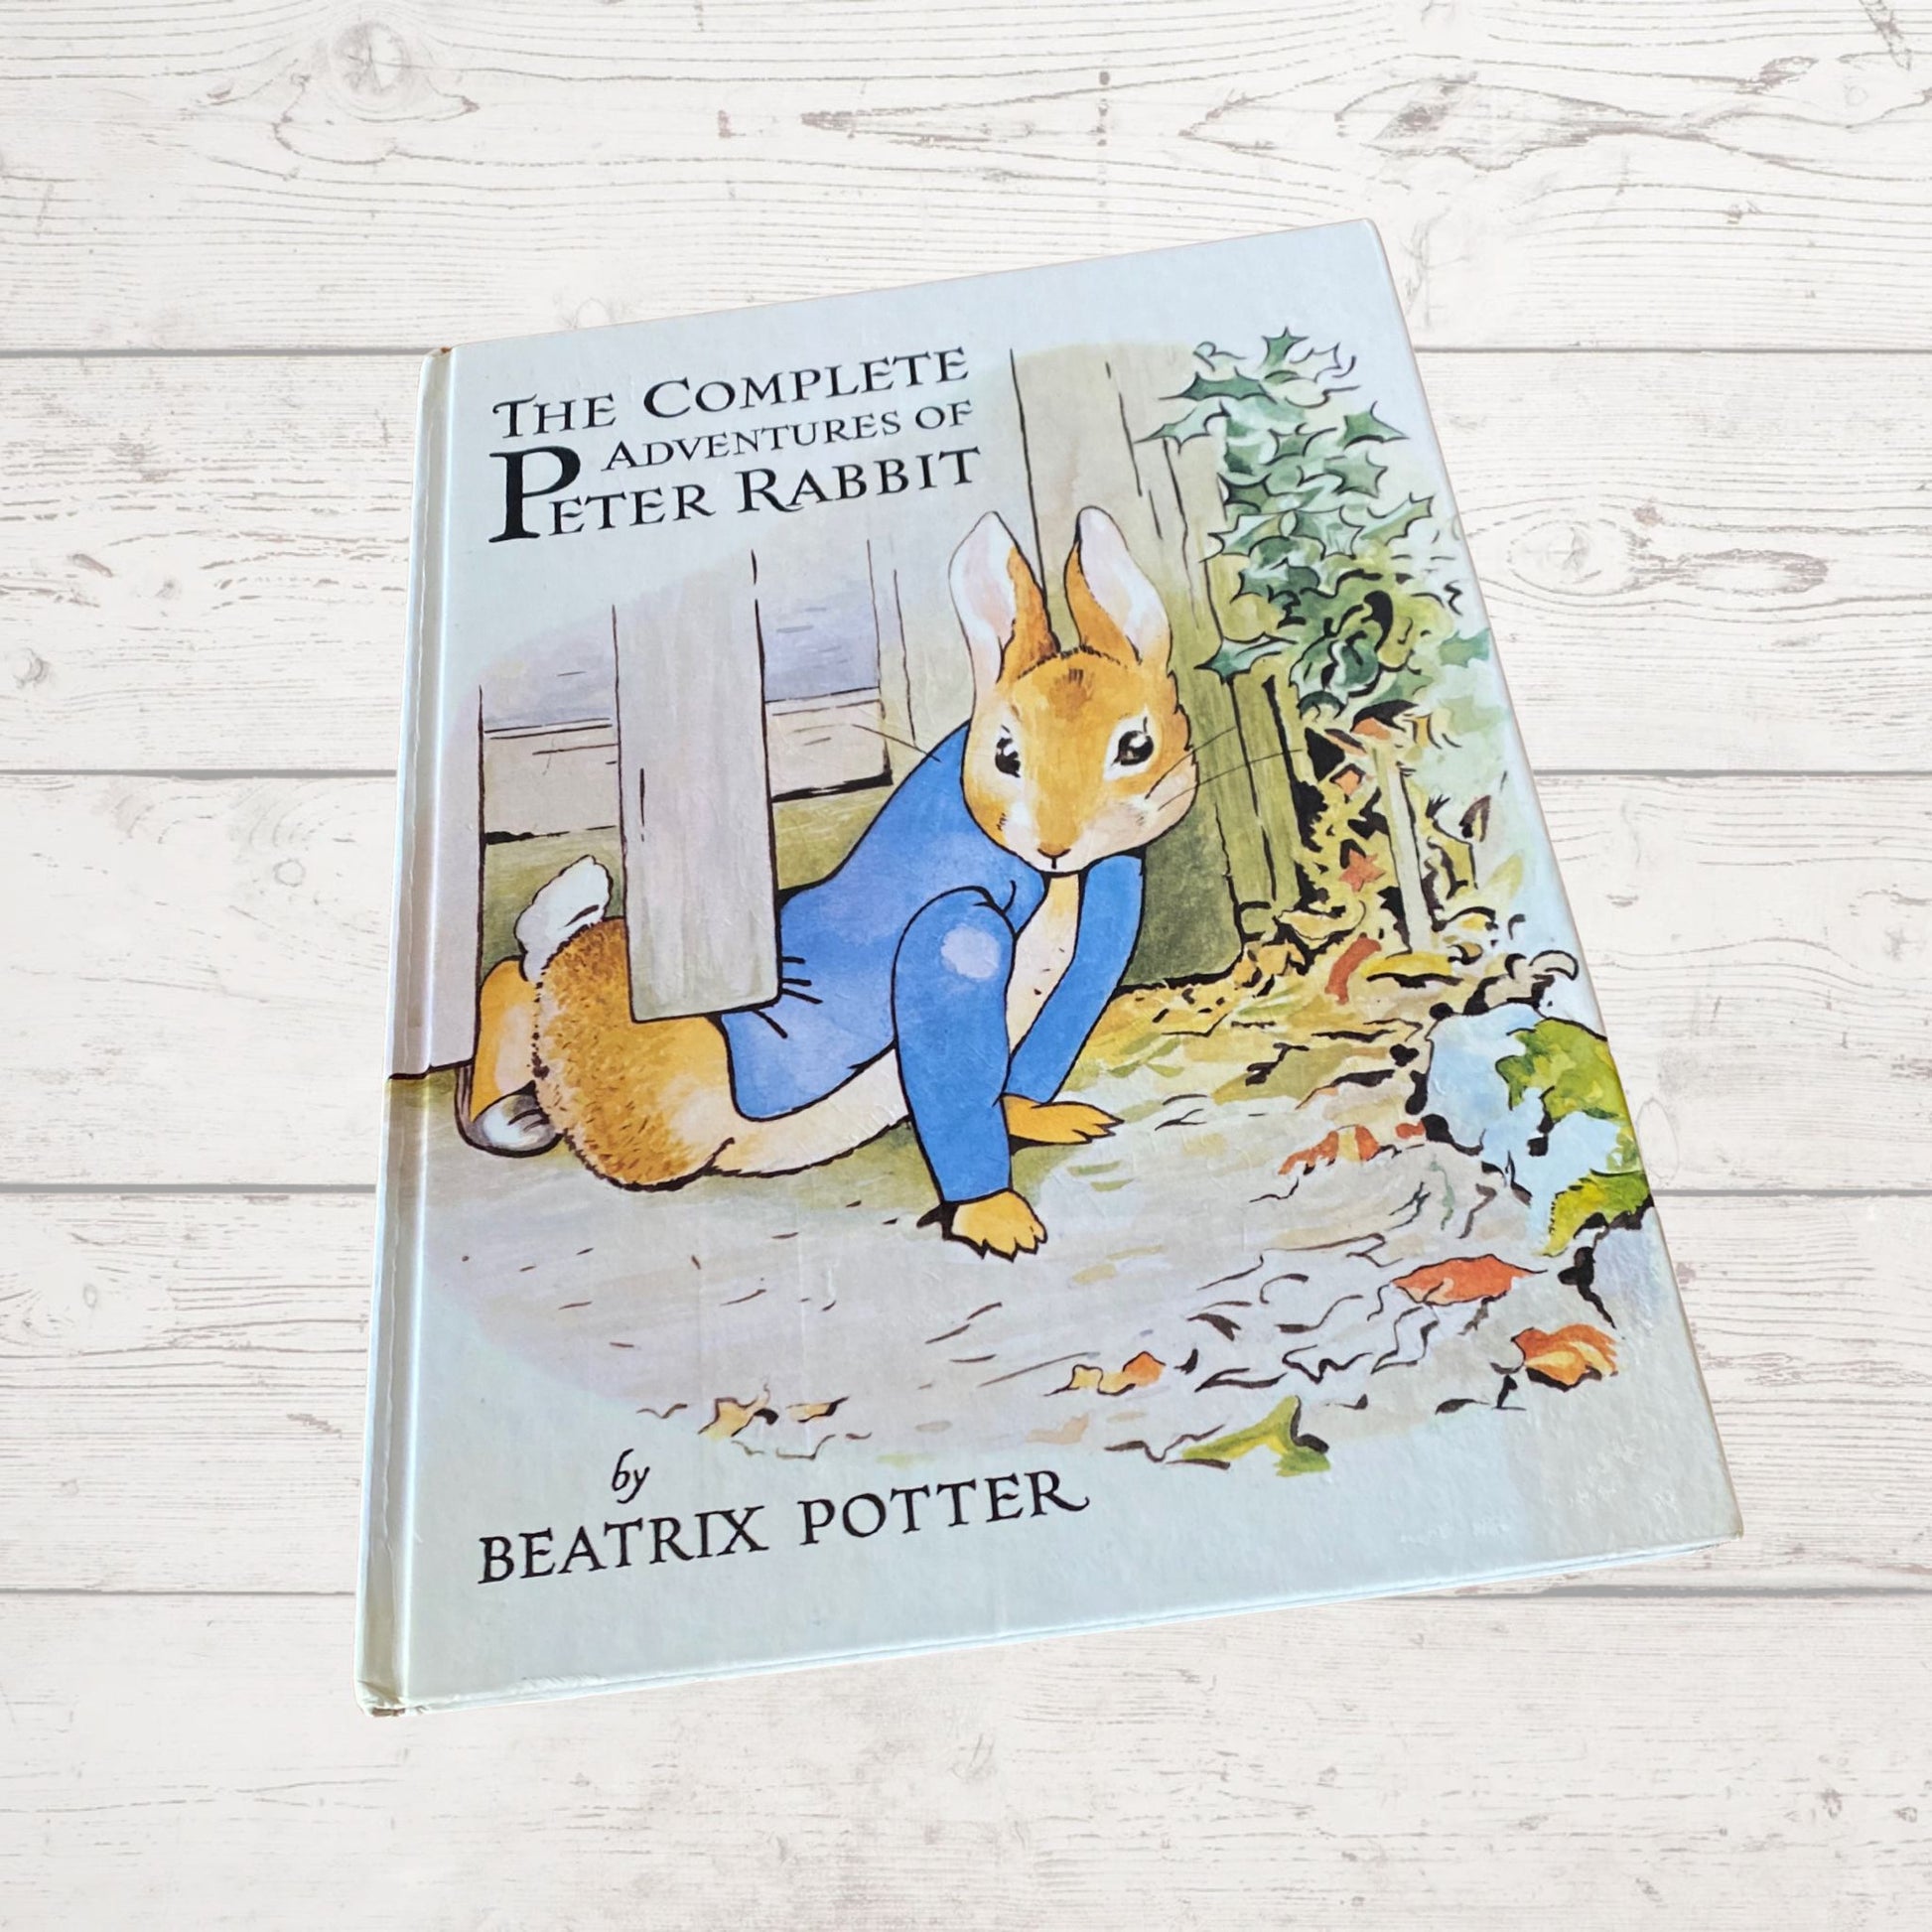 A charming hardback book edition of The Complete Adventures of Peter Rabbit by Beatrix Potter, published in 1982.